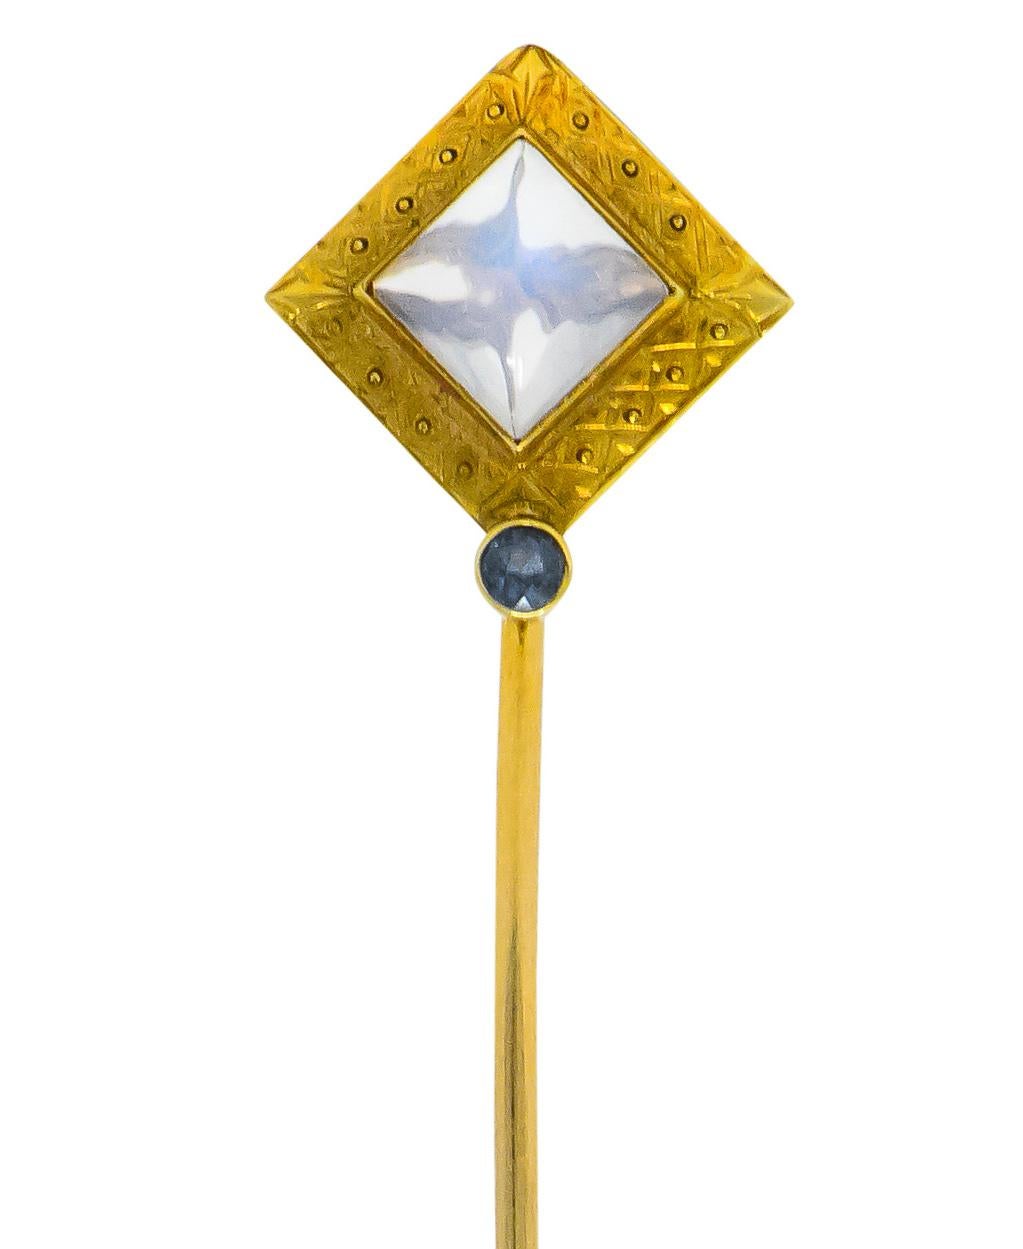 Centering a sugarloaf moonstone measuring approximately 6 x 6 mm, translucent with slight white adularescence

Bezel set in a decorative mount engraved with stylized corners, crosses, and circle motif

Accented by a bezel set, round cut sapphire,